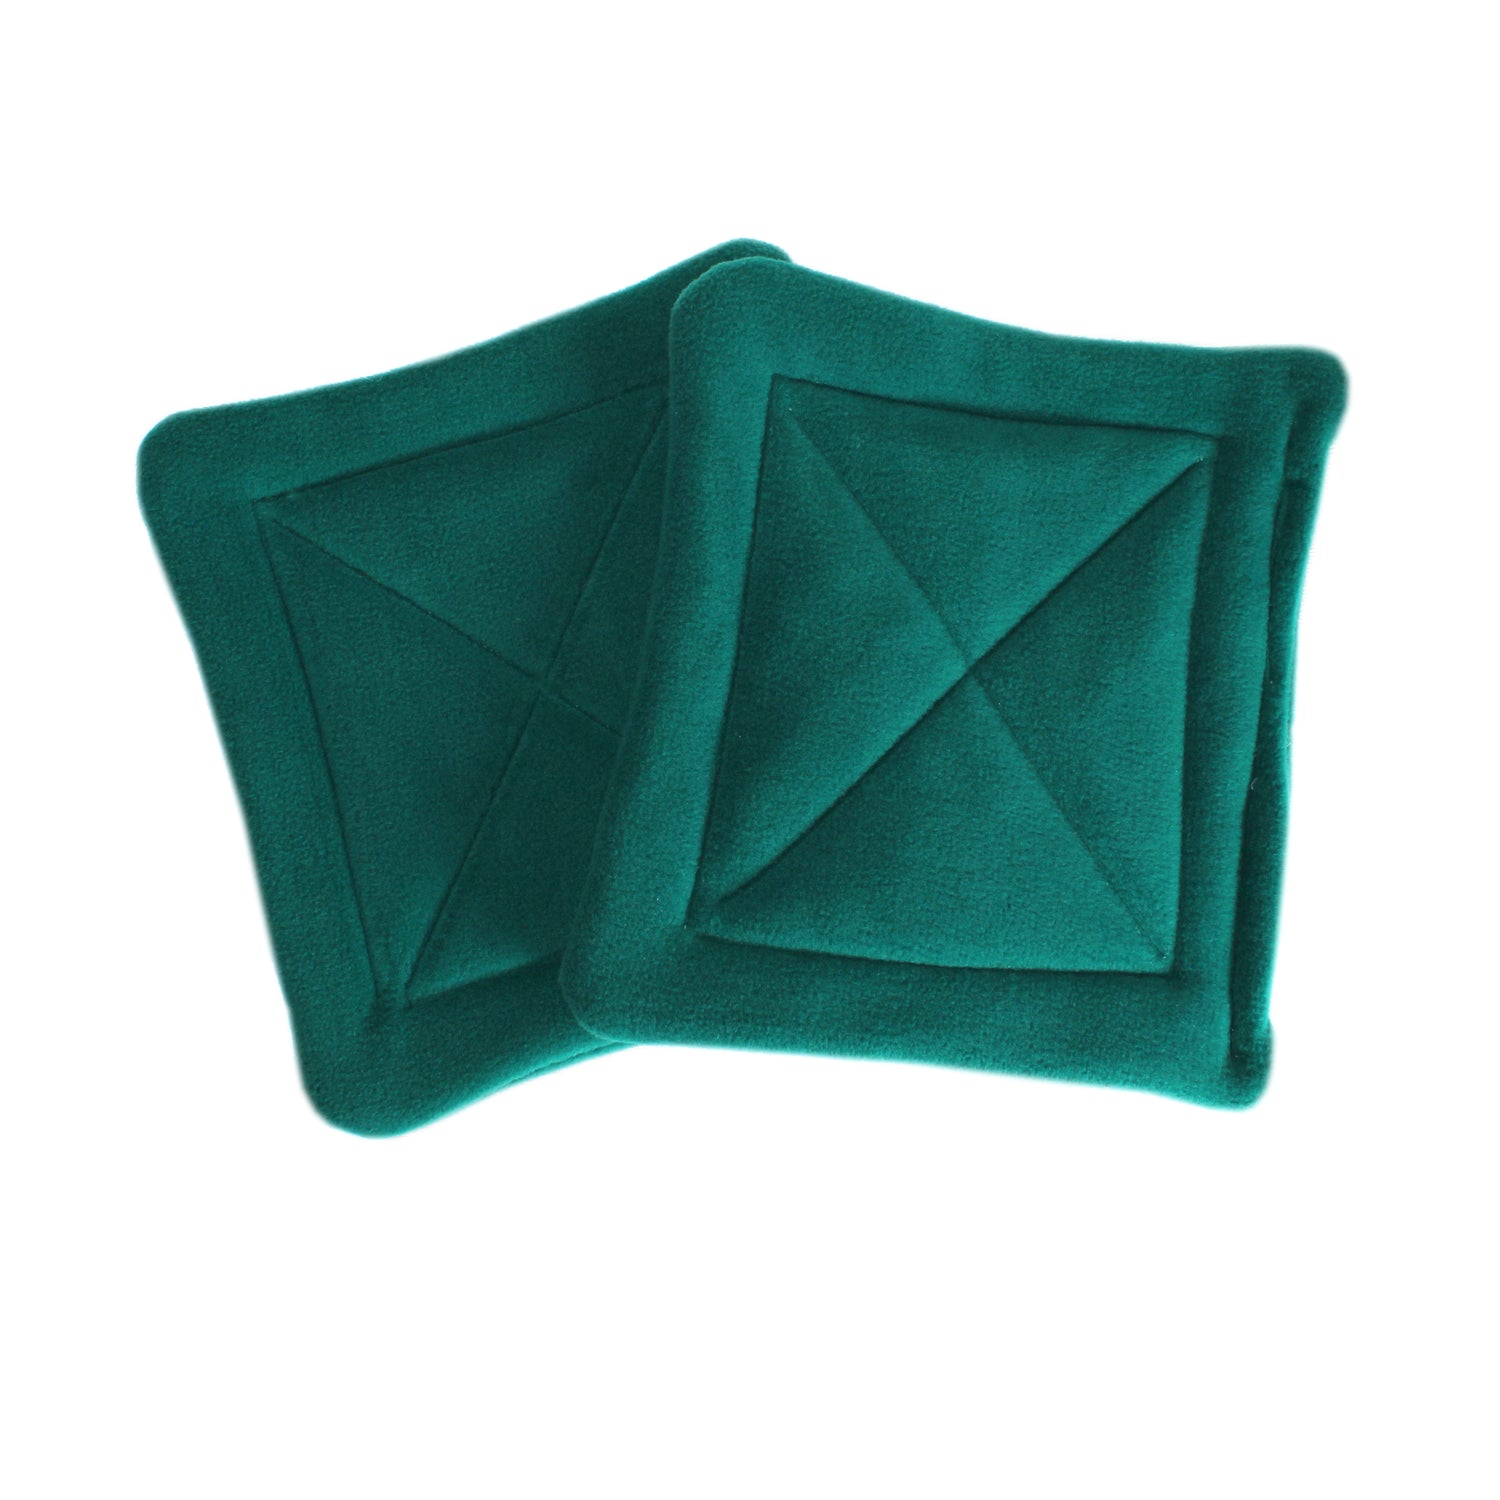 Teal Guinea Pig Pee Pads Made With Anti Pill Fleece And Zorb